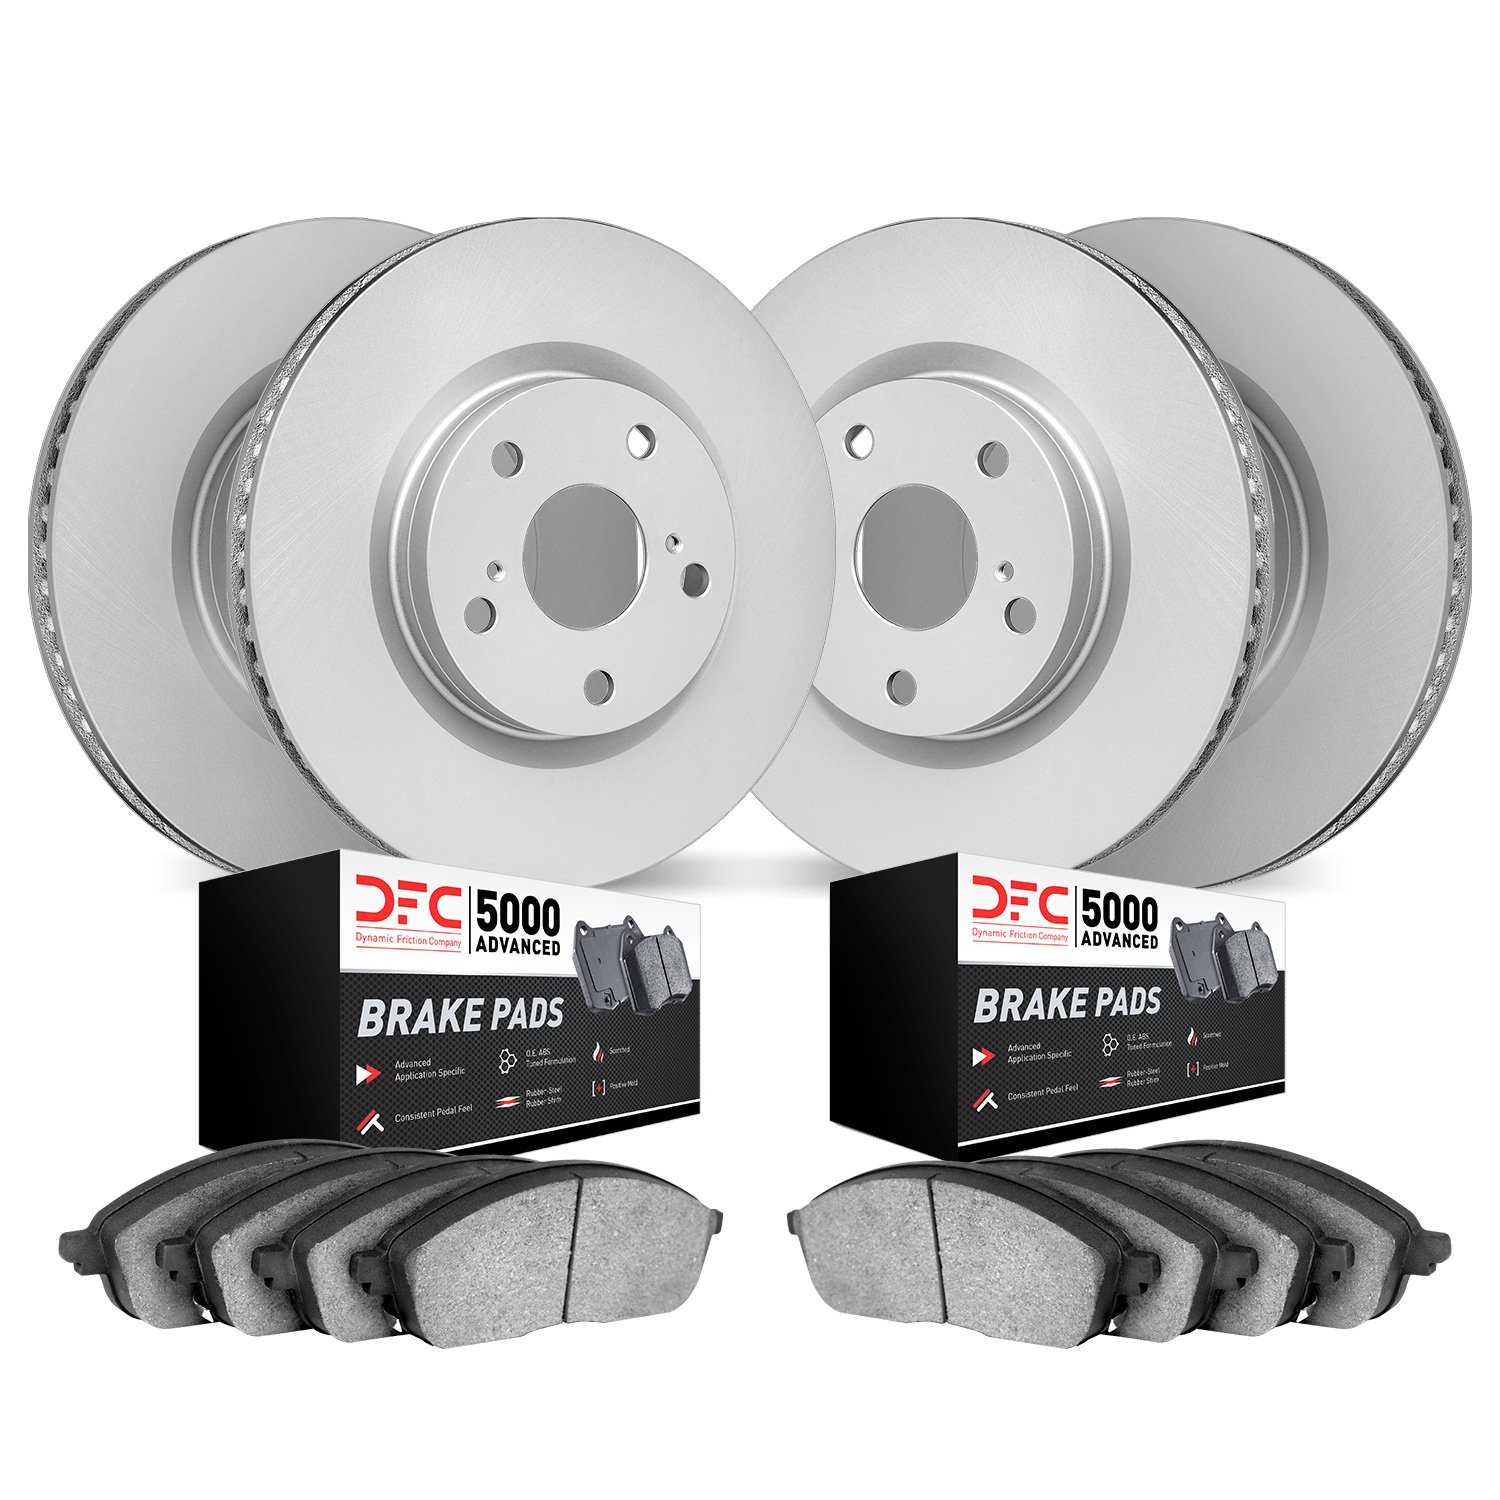 4504-54129 Geospec Brake Rotors w/5000 Advanced Brake Pads Kit, 2012-2012 Ford/Lincoln/Mercury/Mazda, Position: Front and Rear